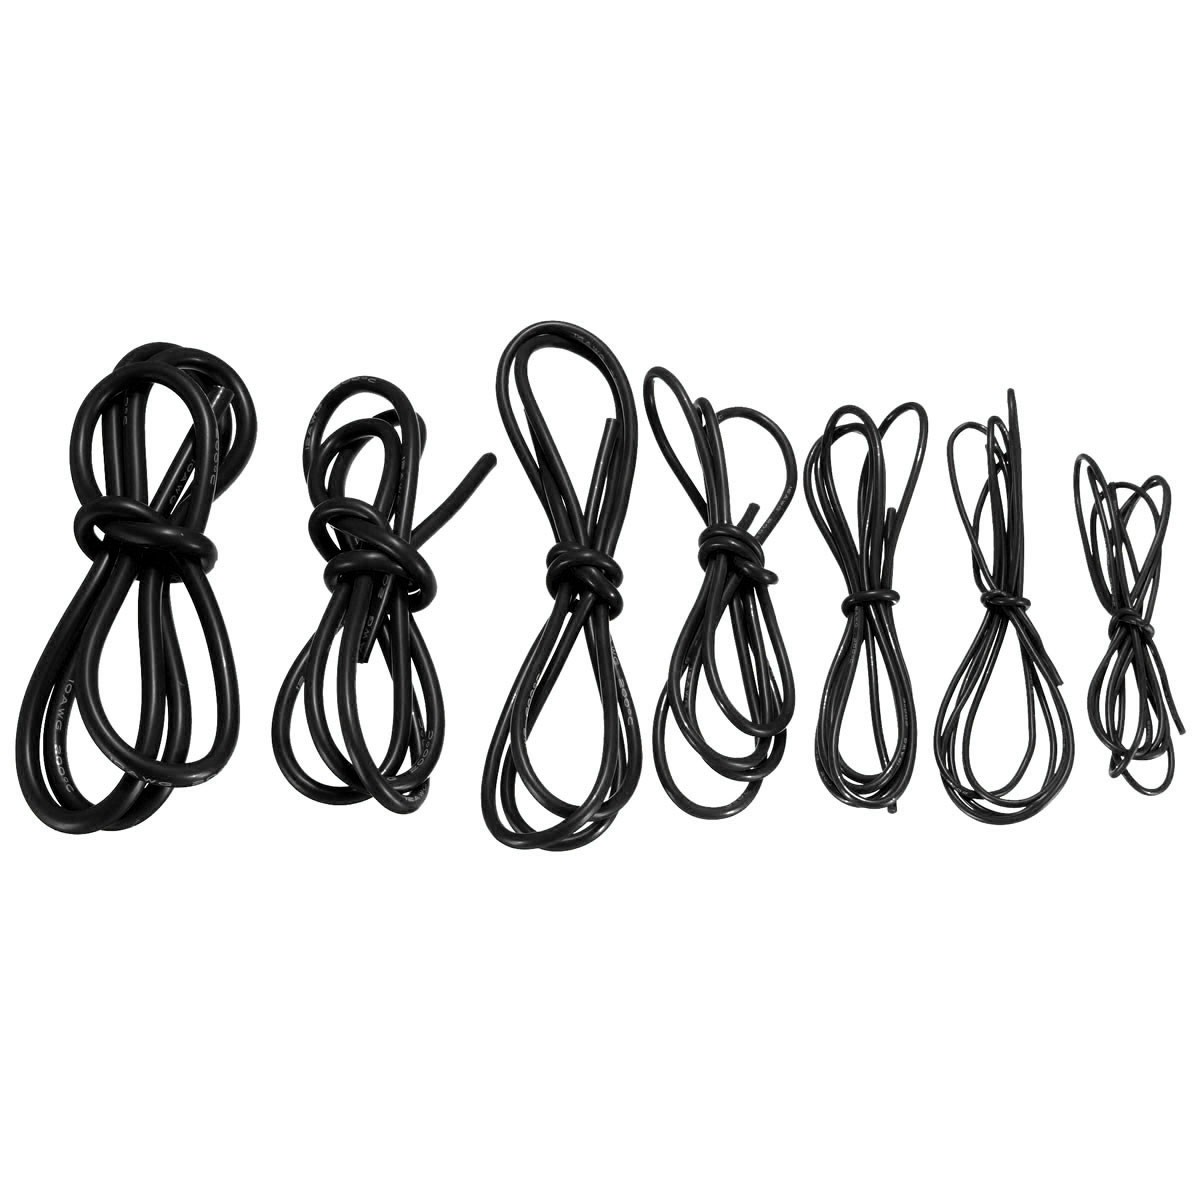 DANIU-1-Meter-Black-Silicone-Wire-Cable-10121416182022AWG-Flexible-Cable-1170273-1